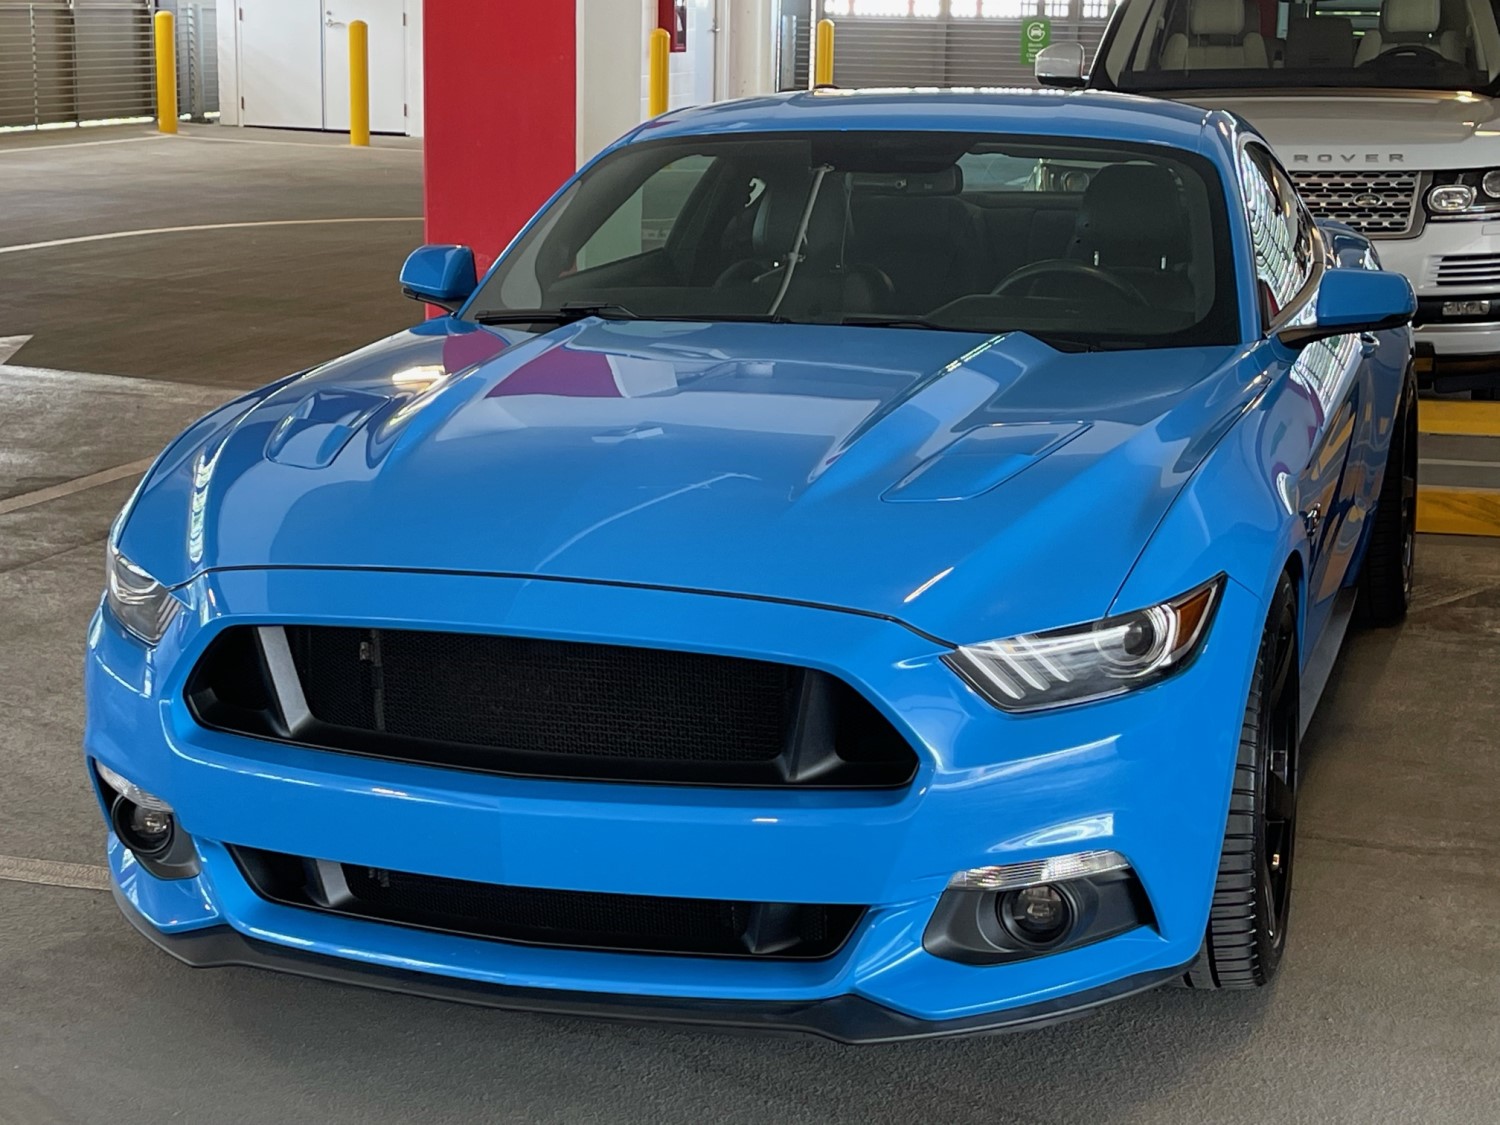 Grabbing Attention: A Plain Grille on a Grabber Blue Ford Mustang